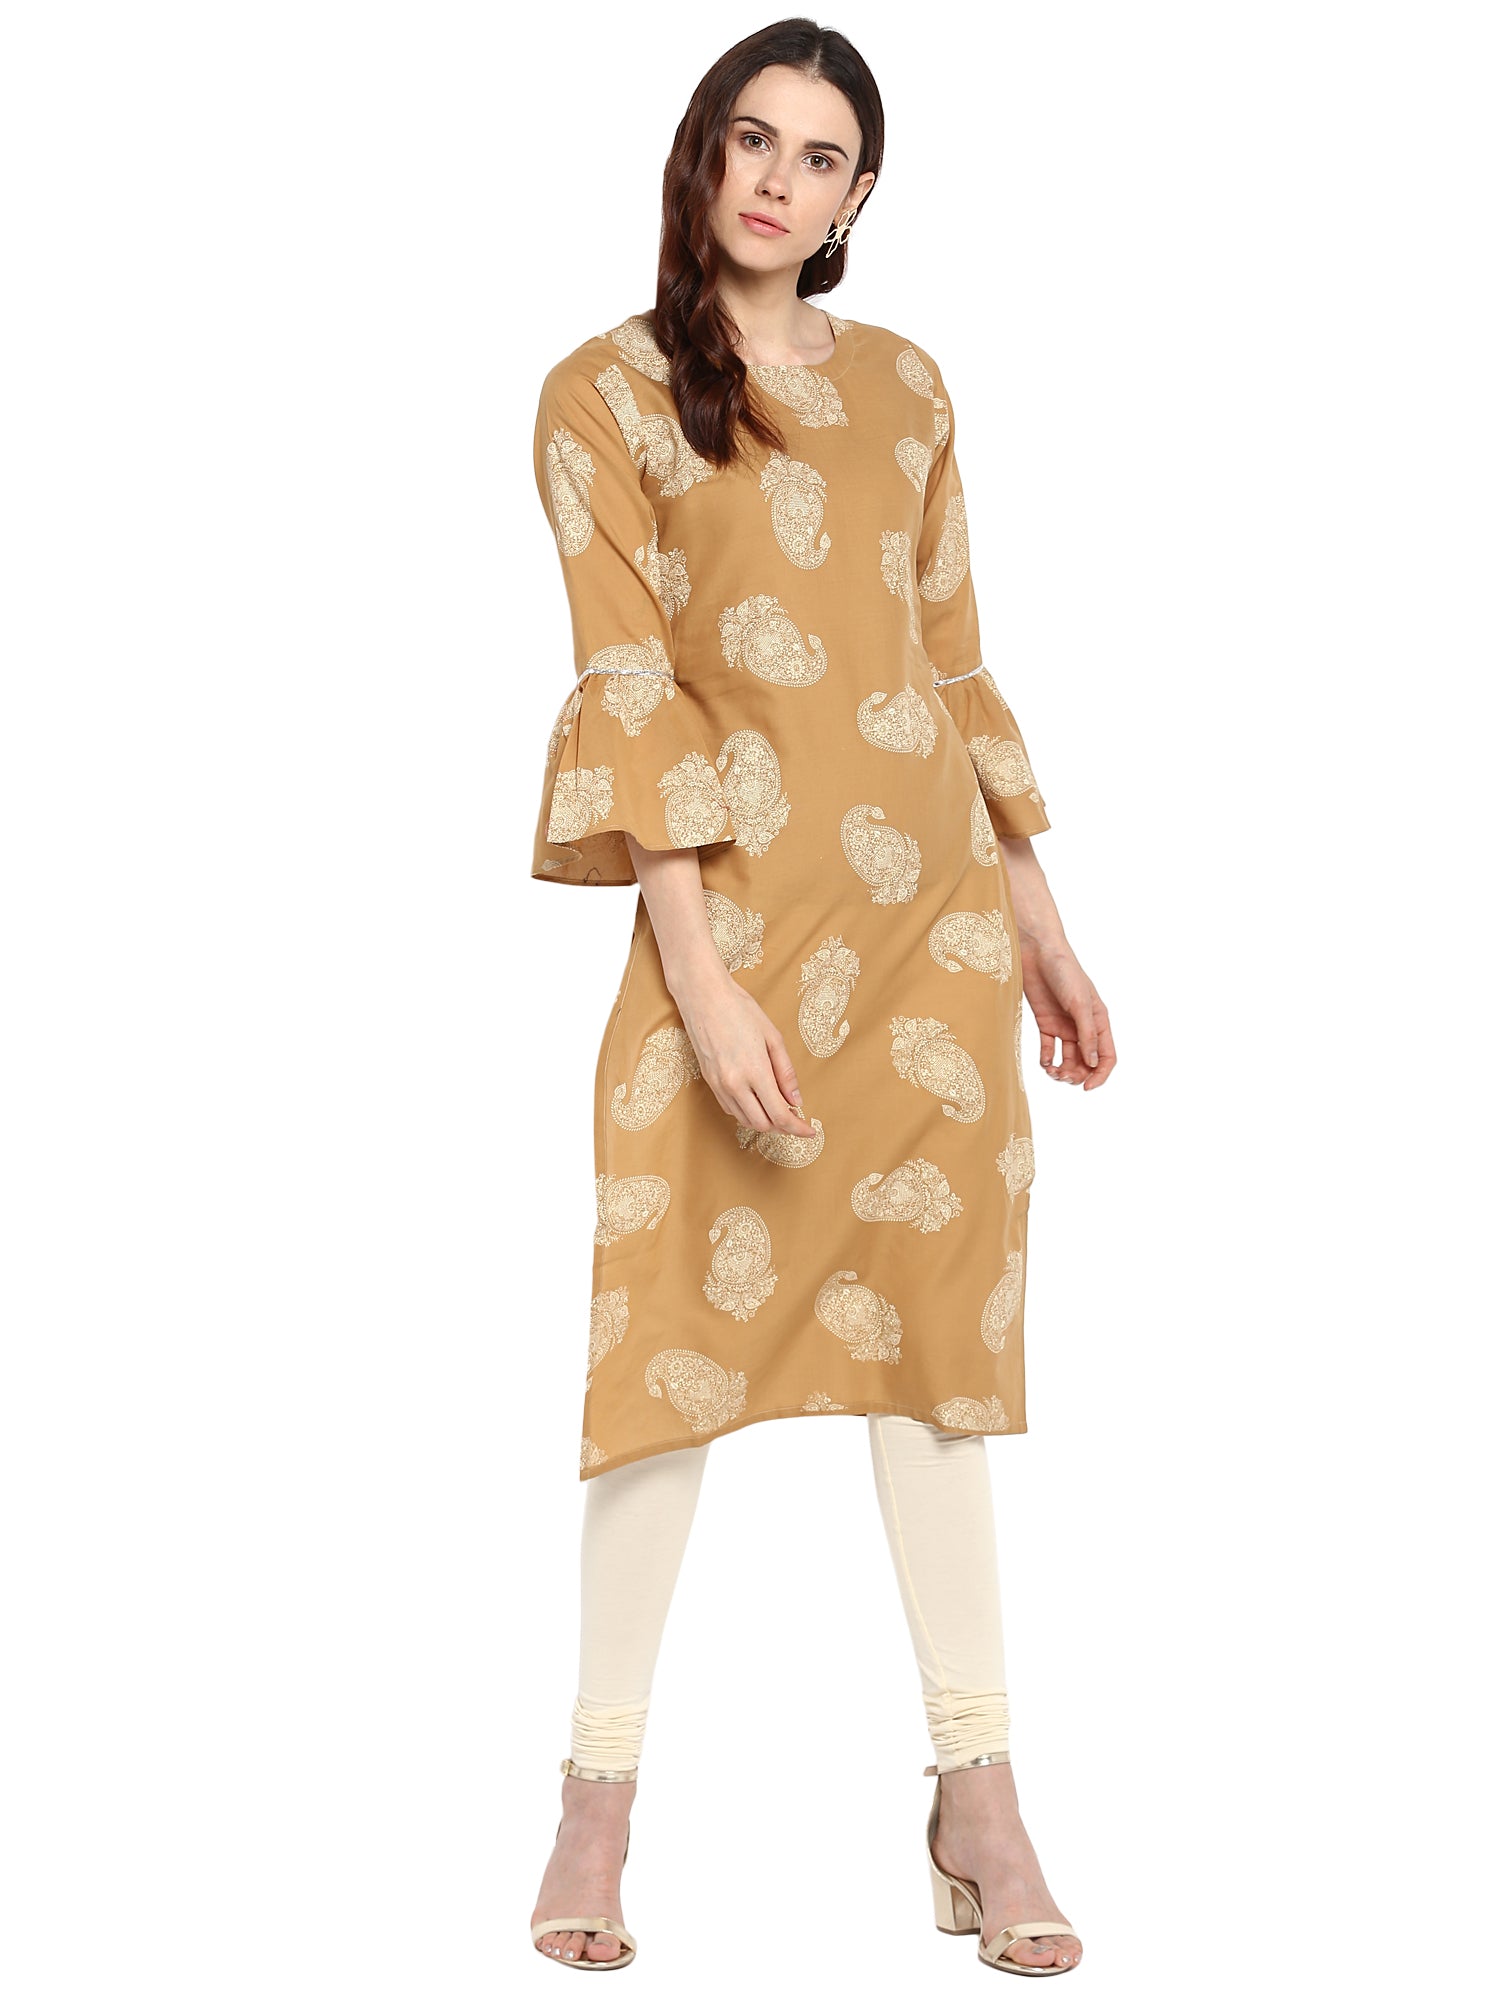 Women's Beige Printed Cotton Only Kurta With Fit & Flare Sleeves - Ahalyaa